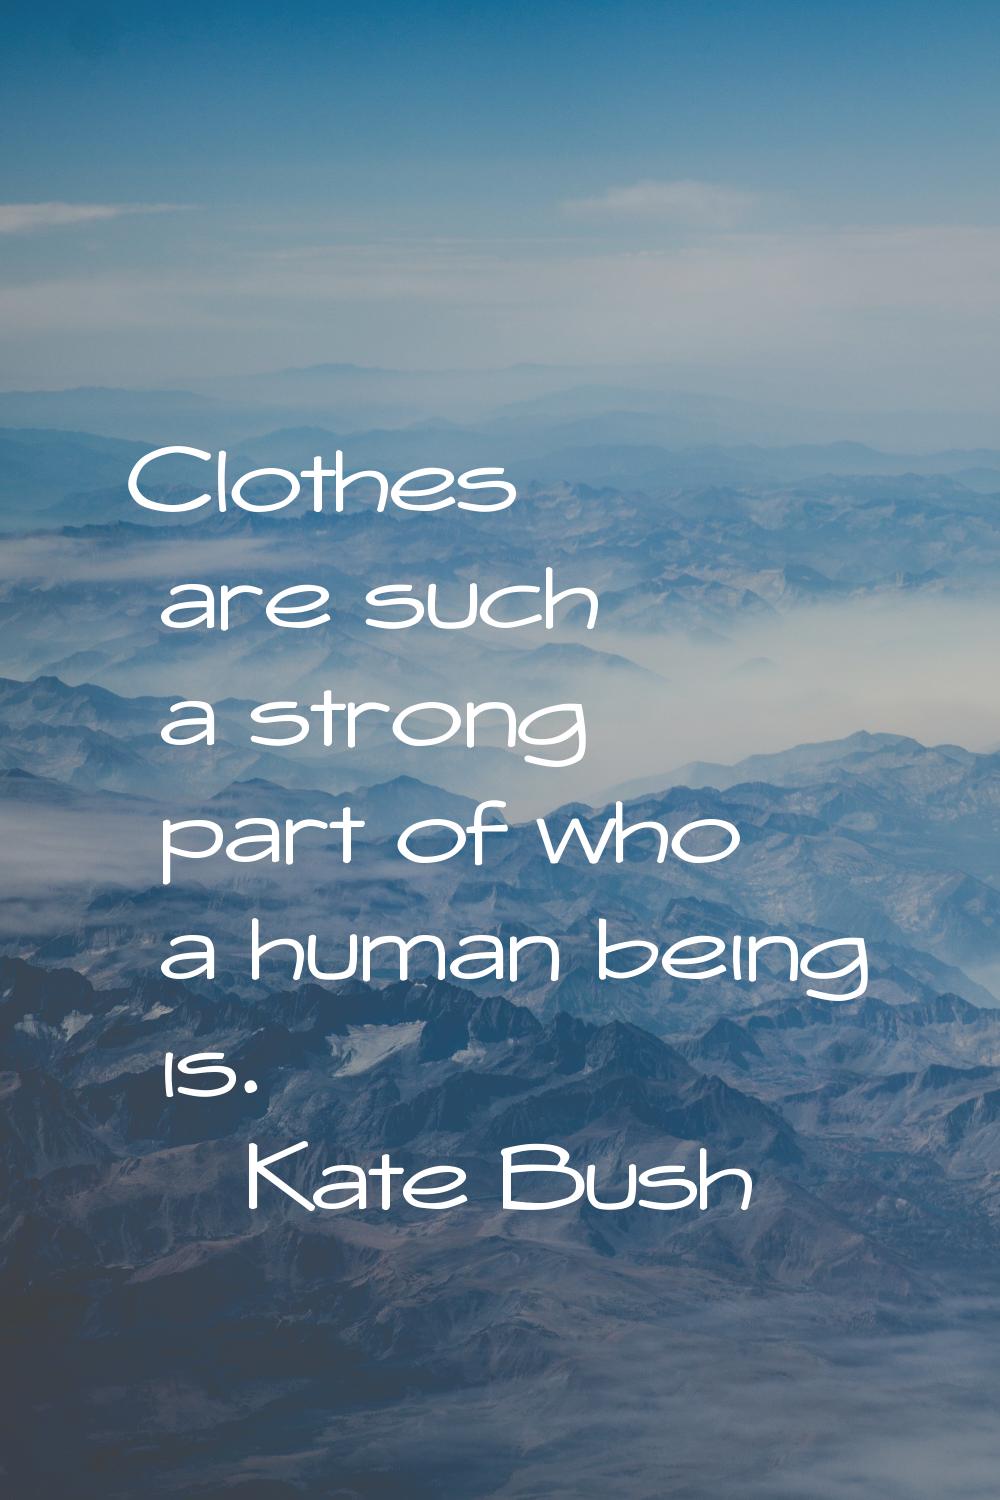 Clothes are such a strong part of who a human being is.